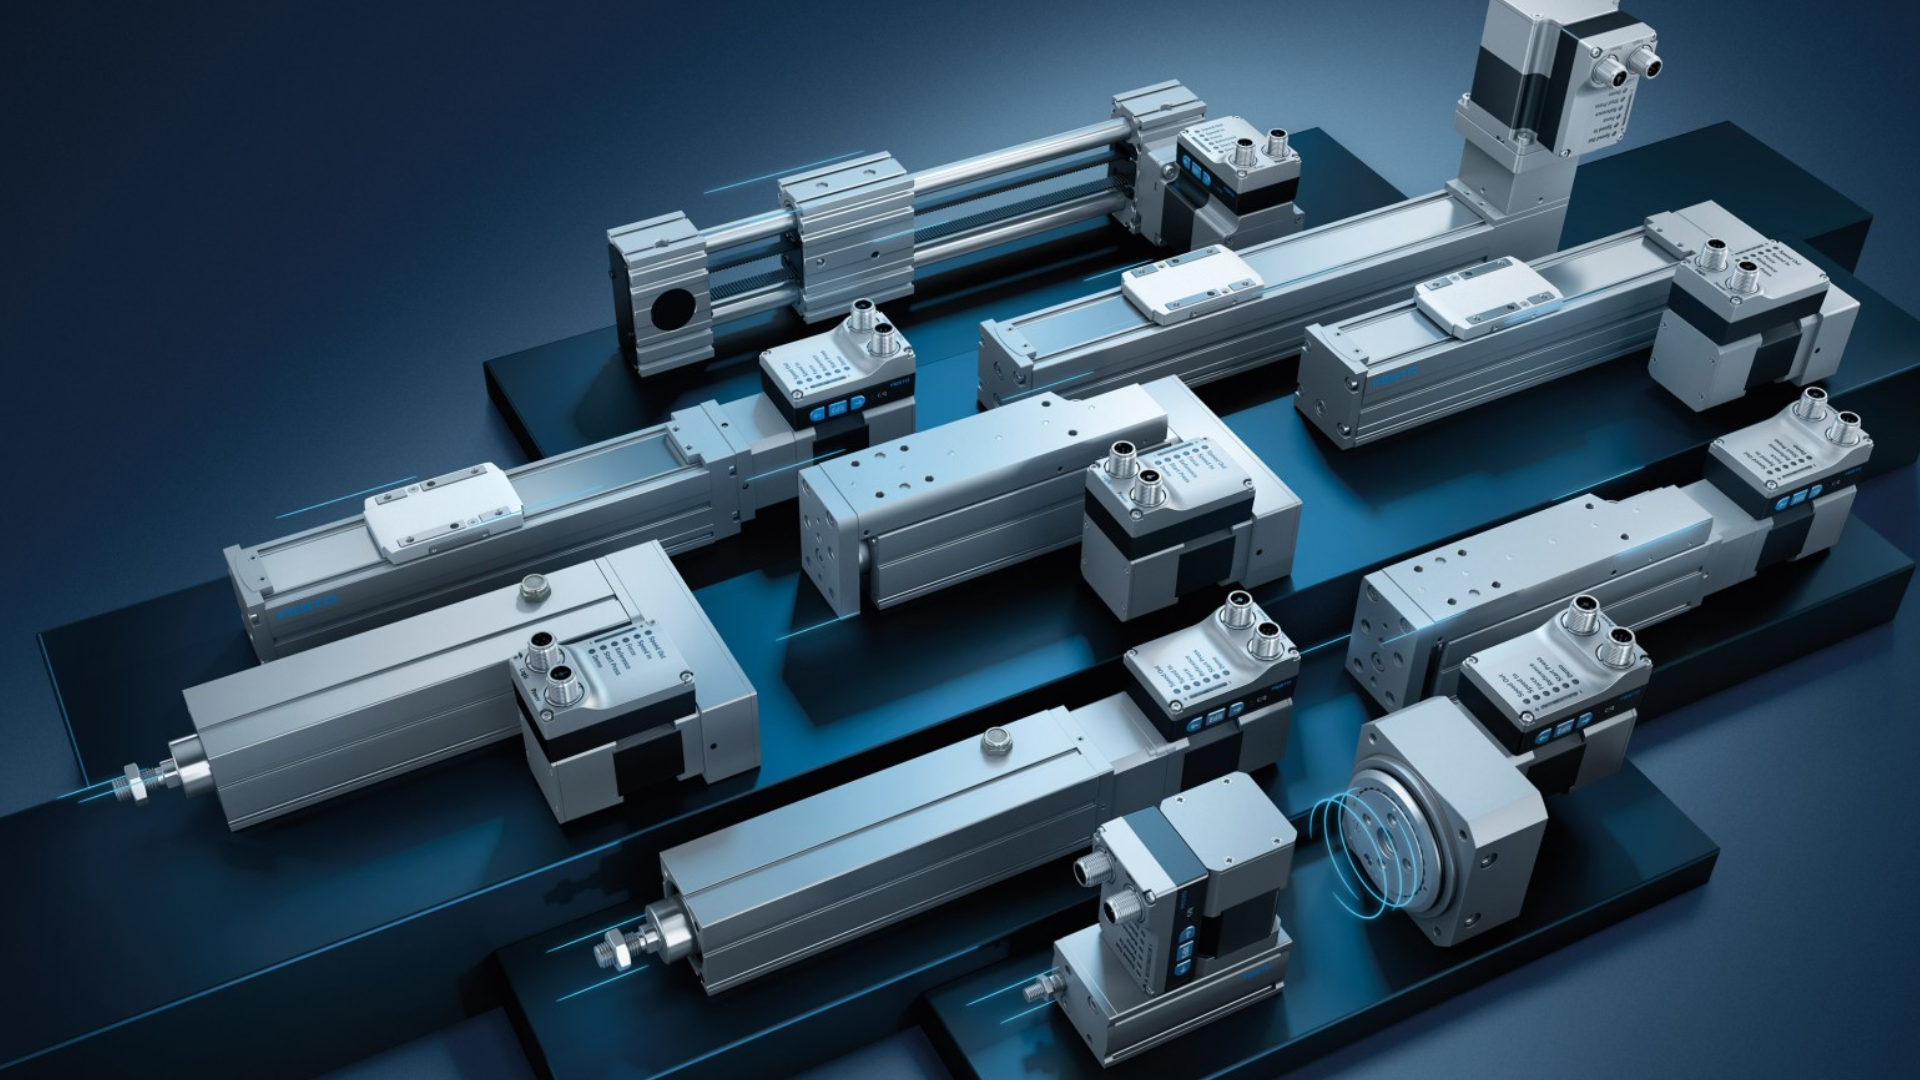 Product of the Month: Festo's Simplified Motion Series